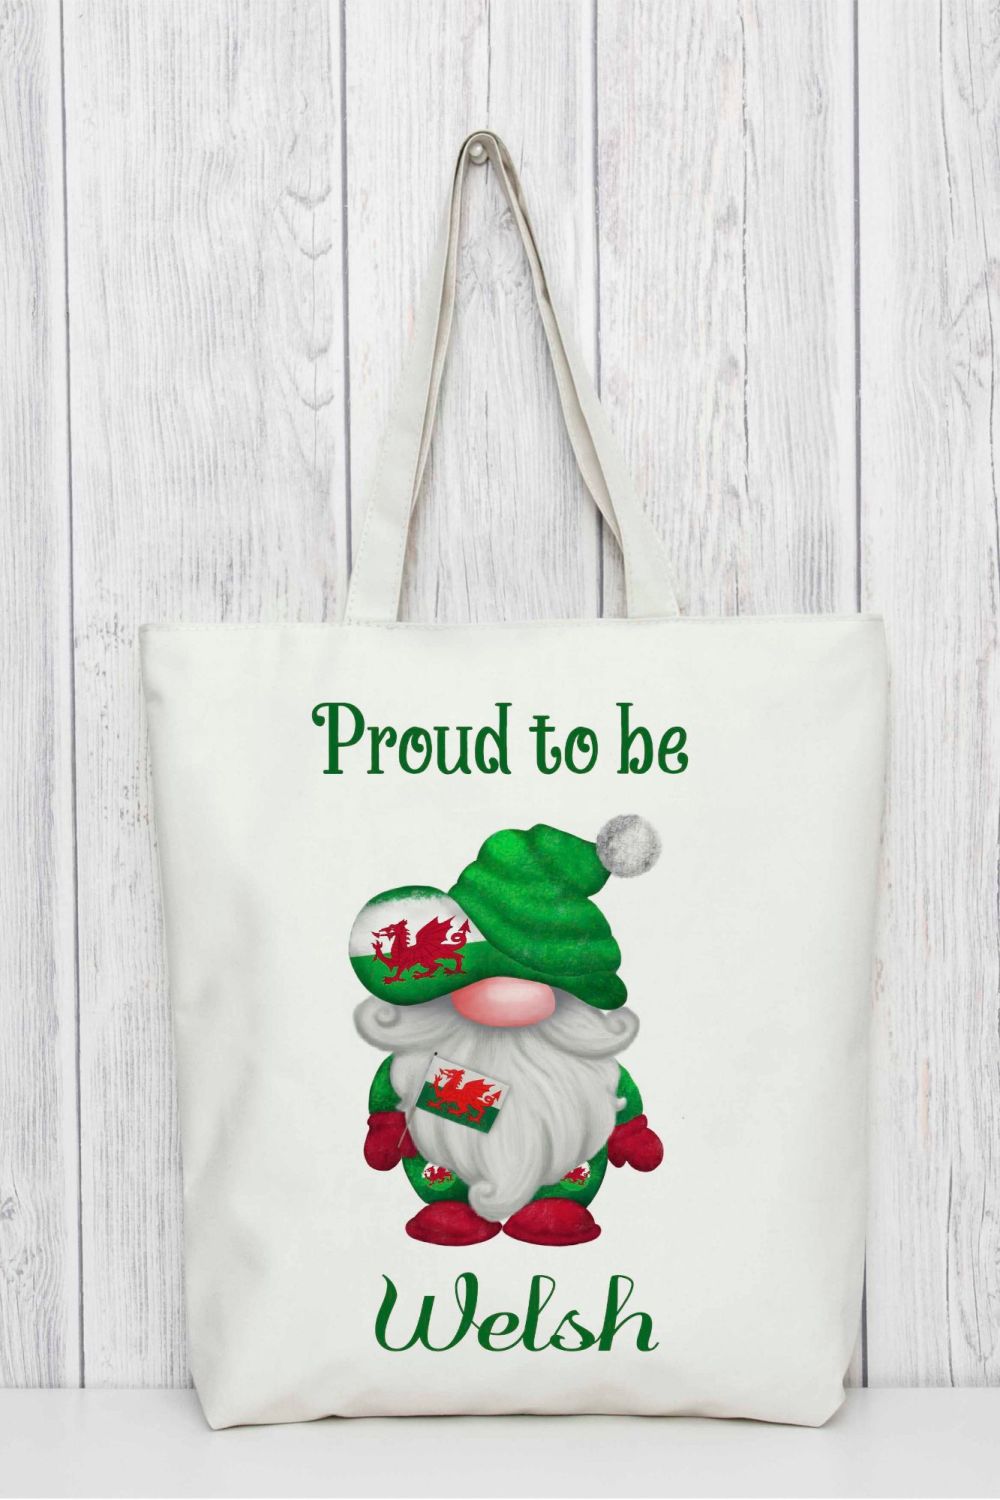 Proud to be Welsh Tote Bag - Wales Bag for Life